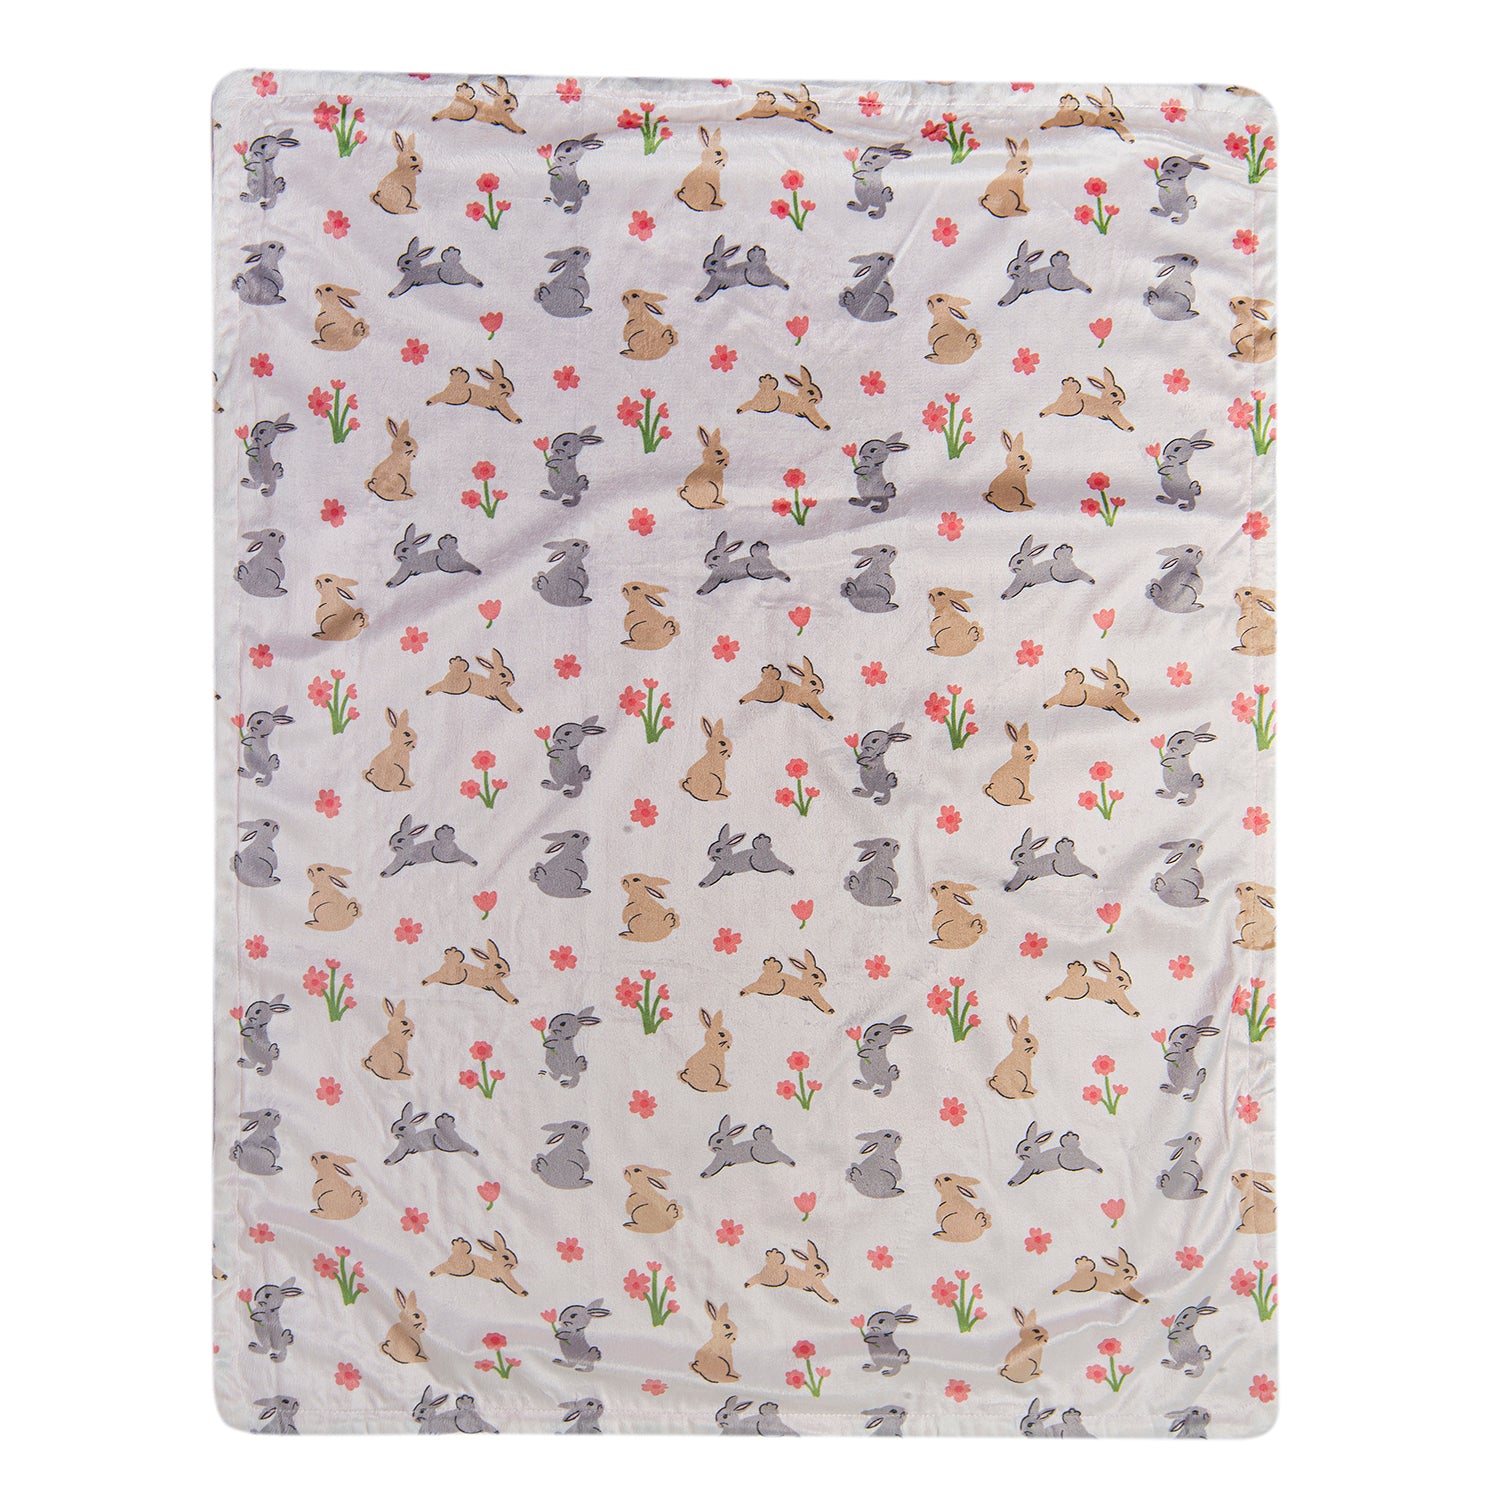 Baby Moo Hopping Bunnies Soft Reversible Bubble Blanket Pink